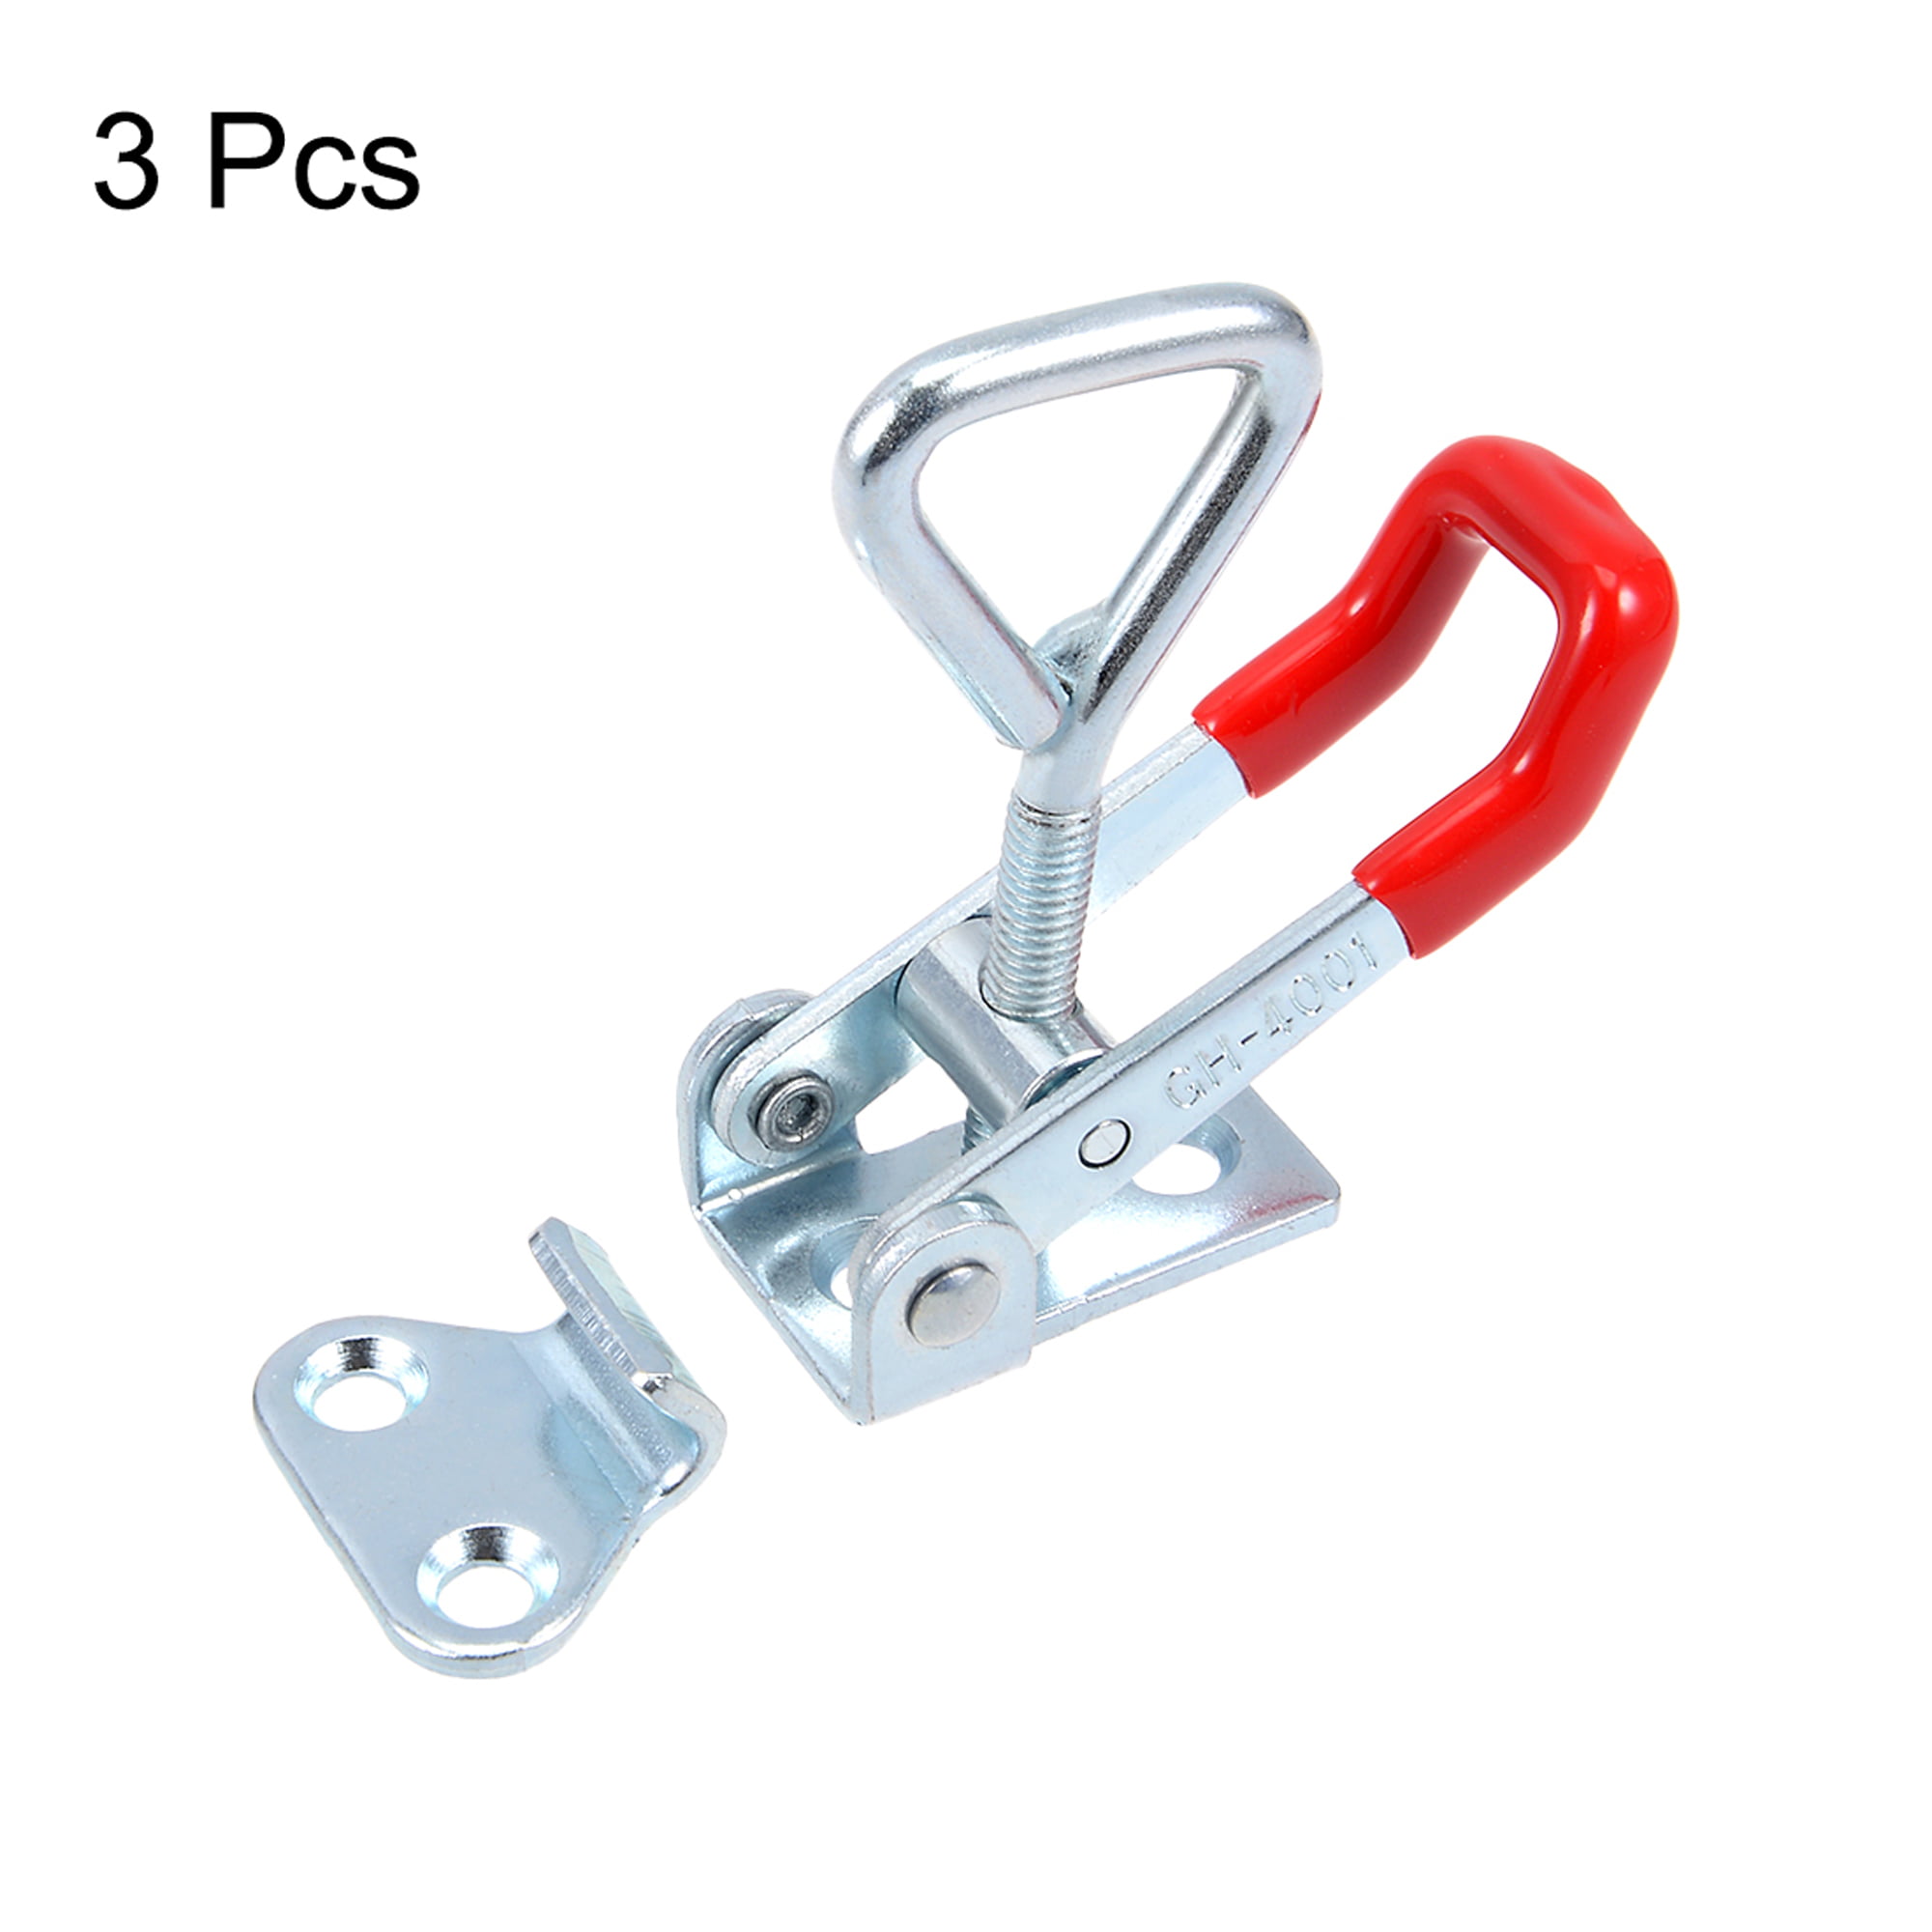 Toggle Latch Clamp 320Kg 704lbs Capacity Pull Action Adjustable Latch GH-431 